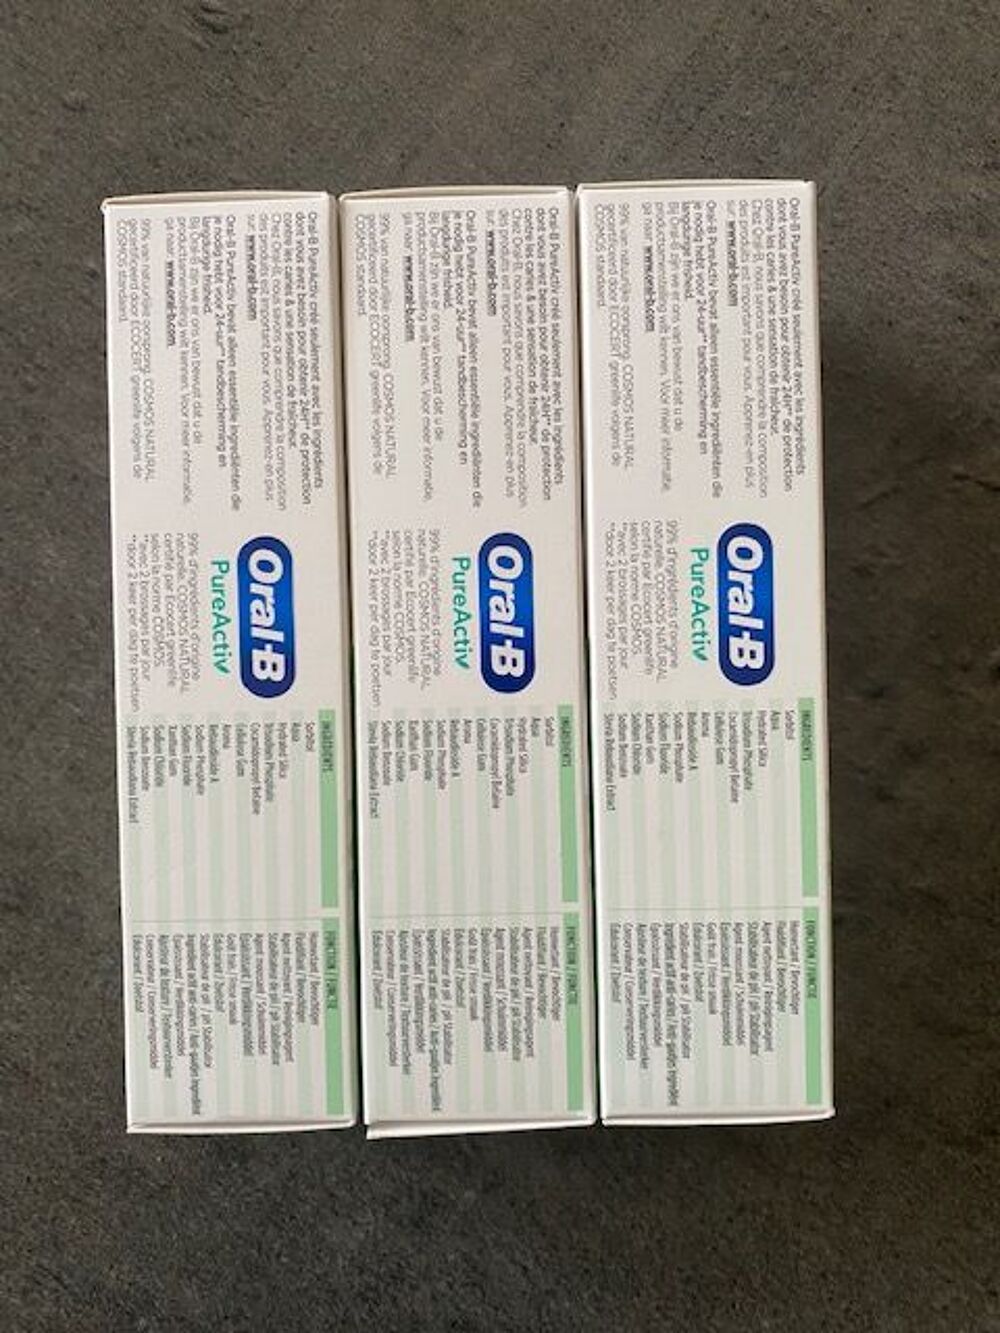 Lot 3 tubes oral B neufs Puriculture